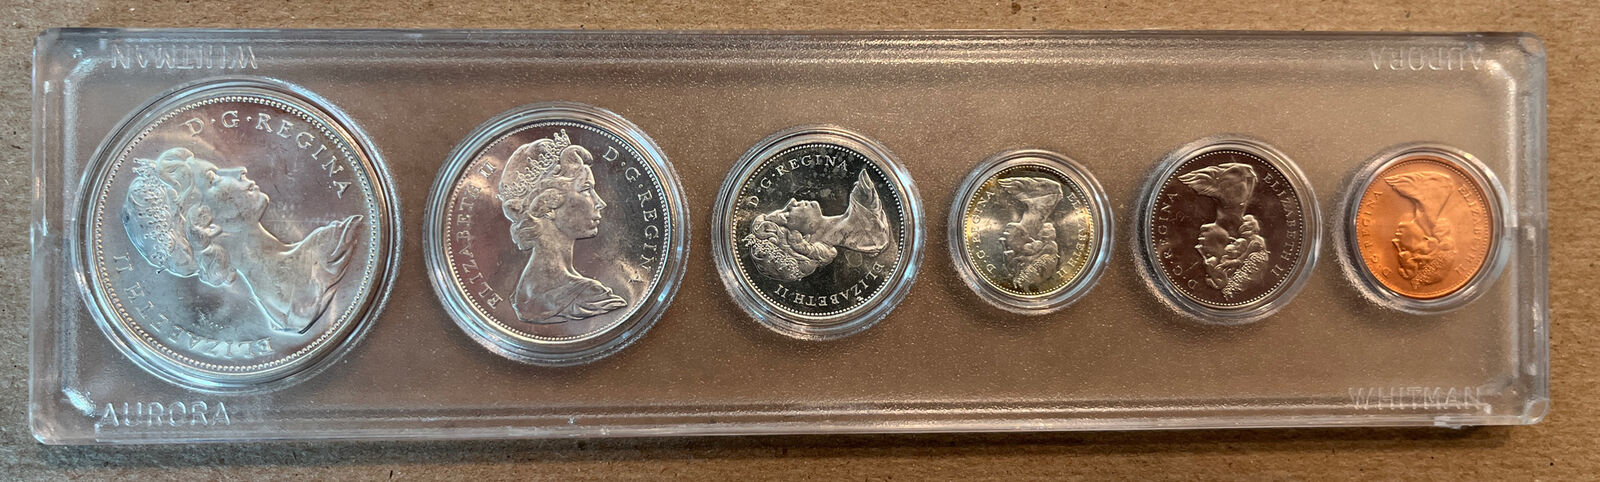 1966 Canada 6-coin Silver type set plastic display case